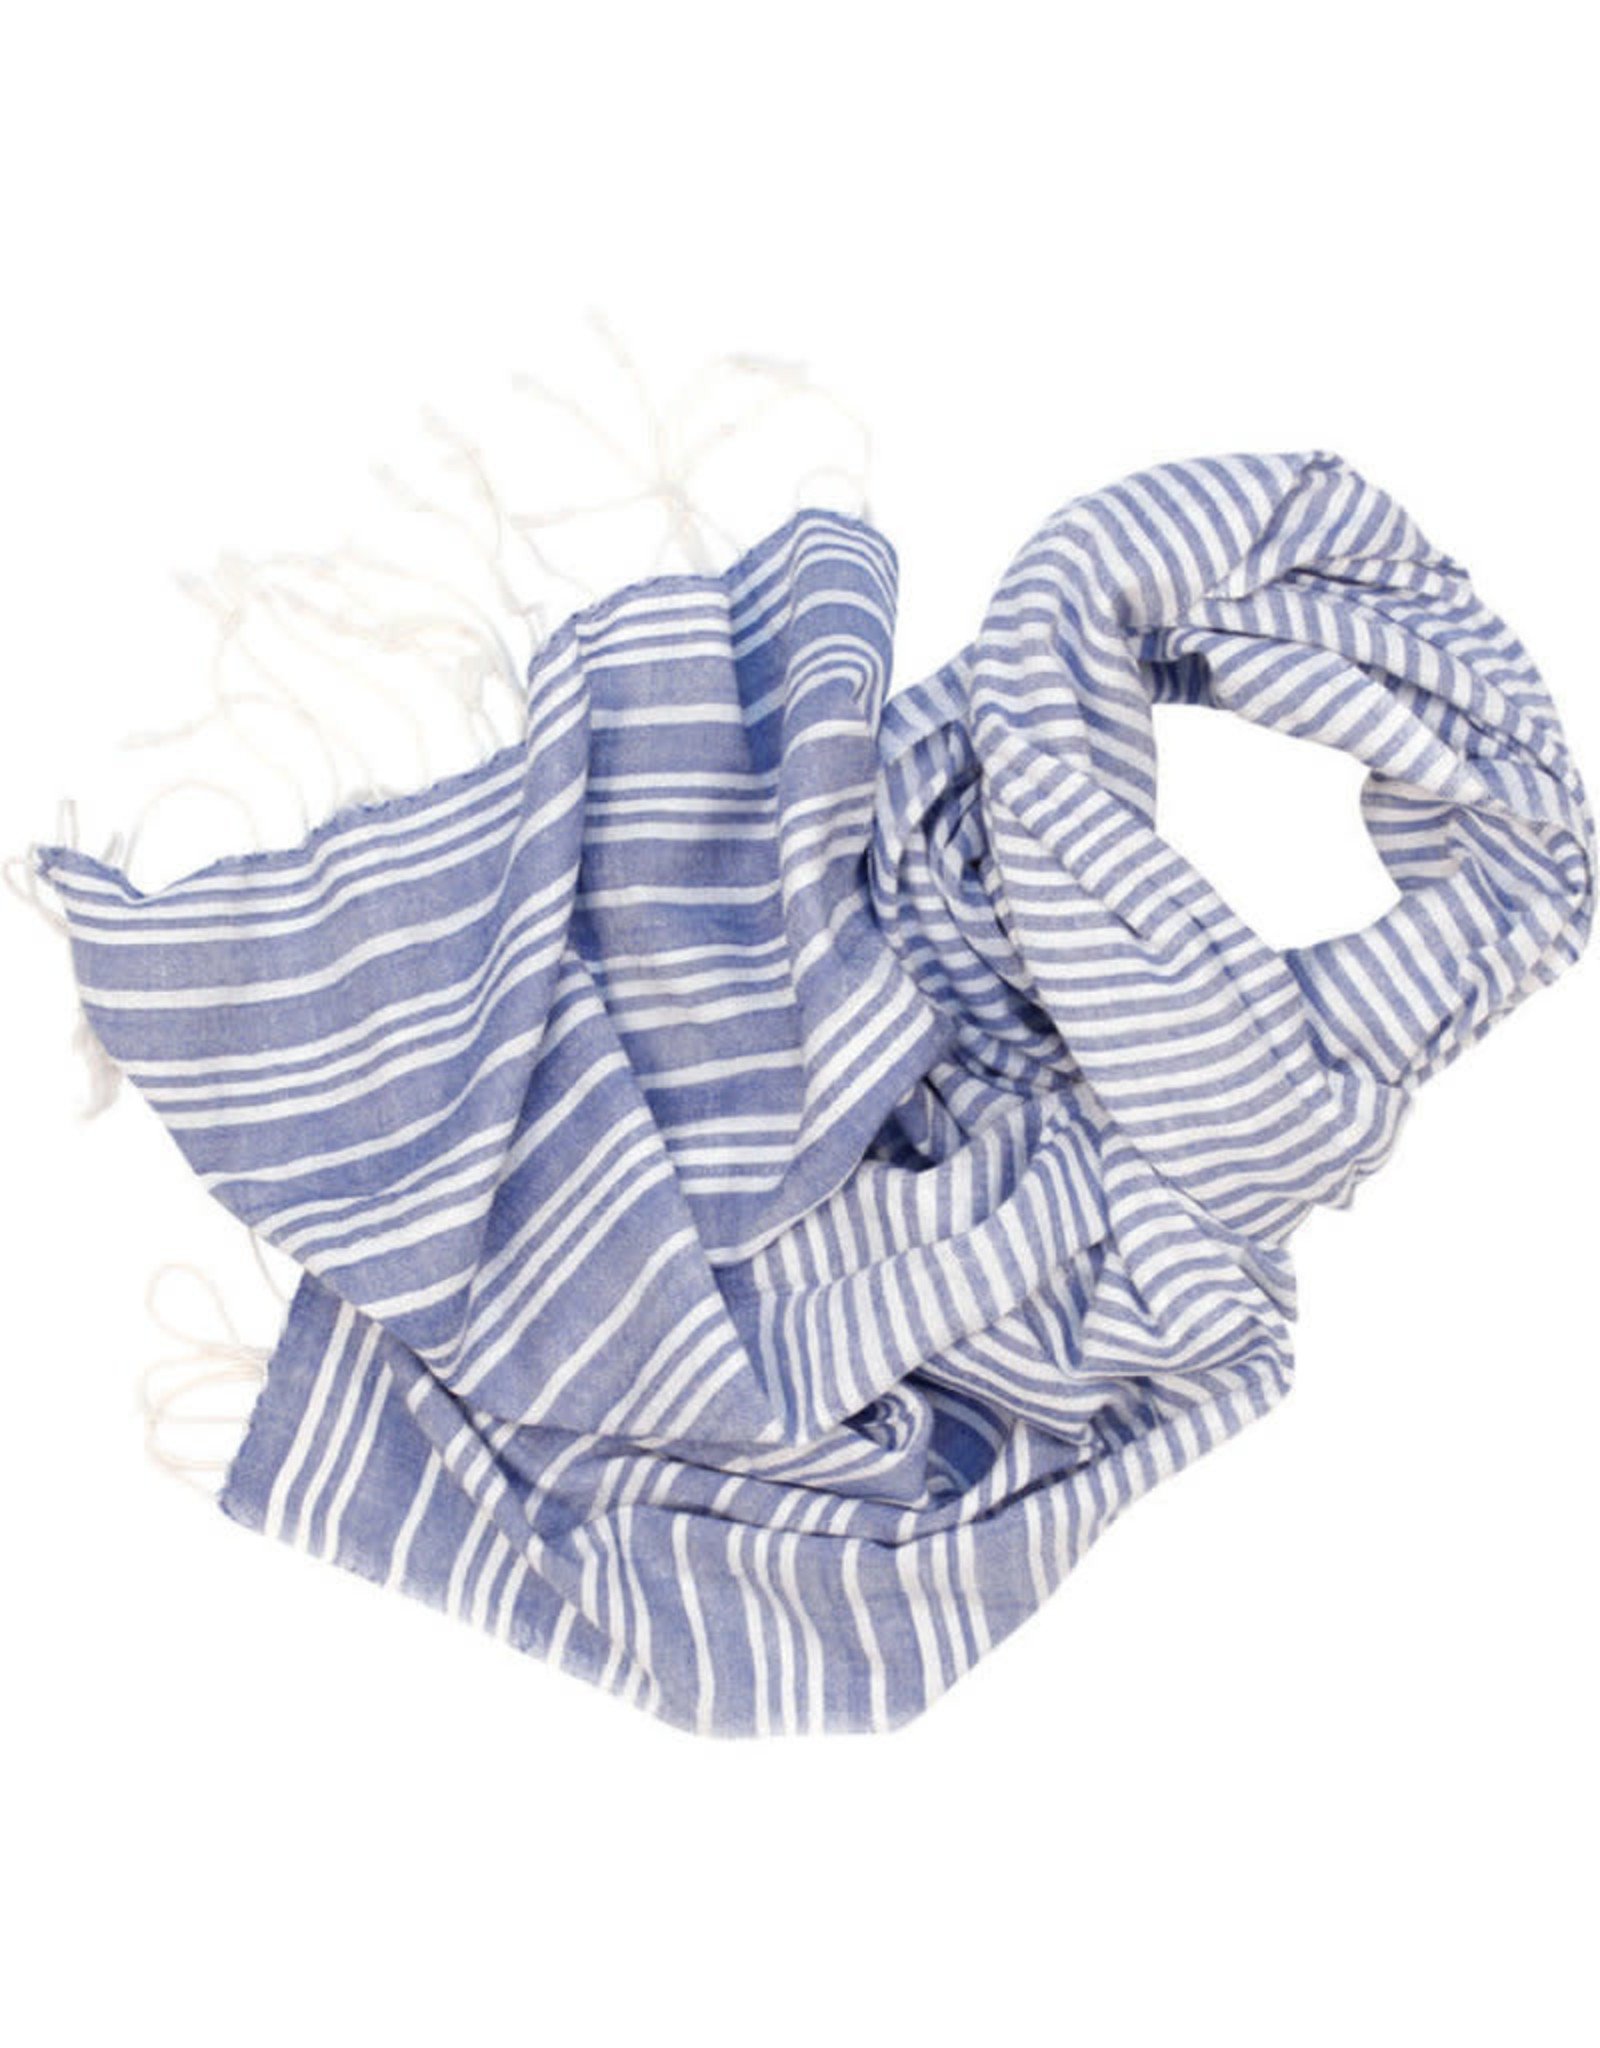 India Scarf Blue & White Lines - India